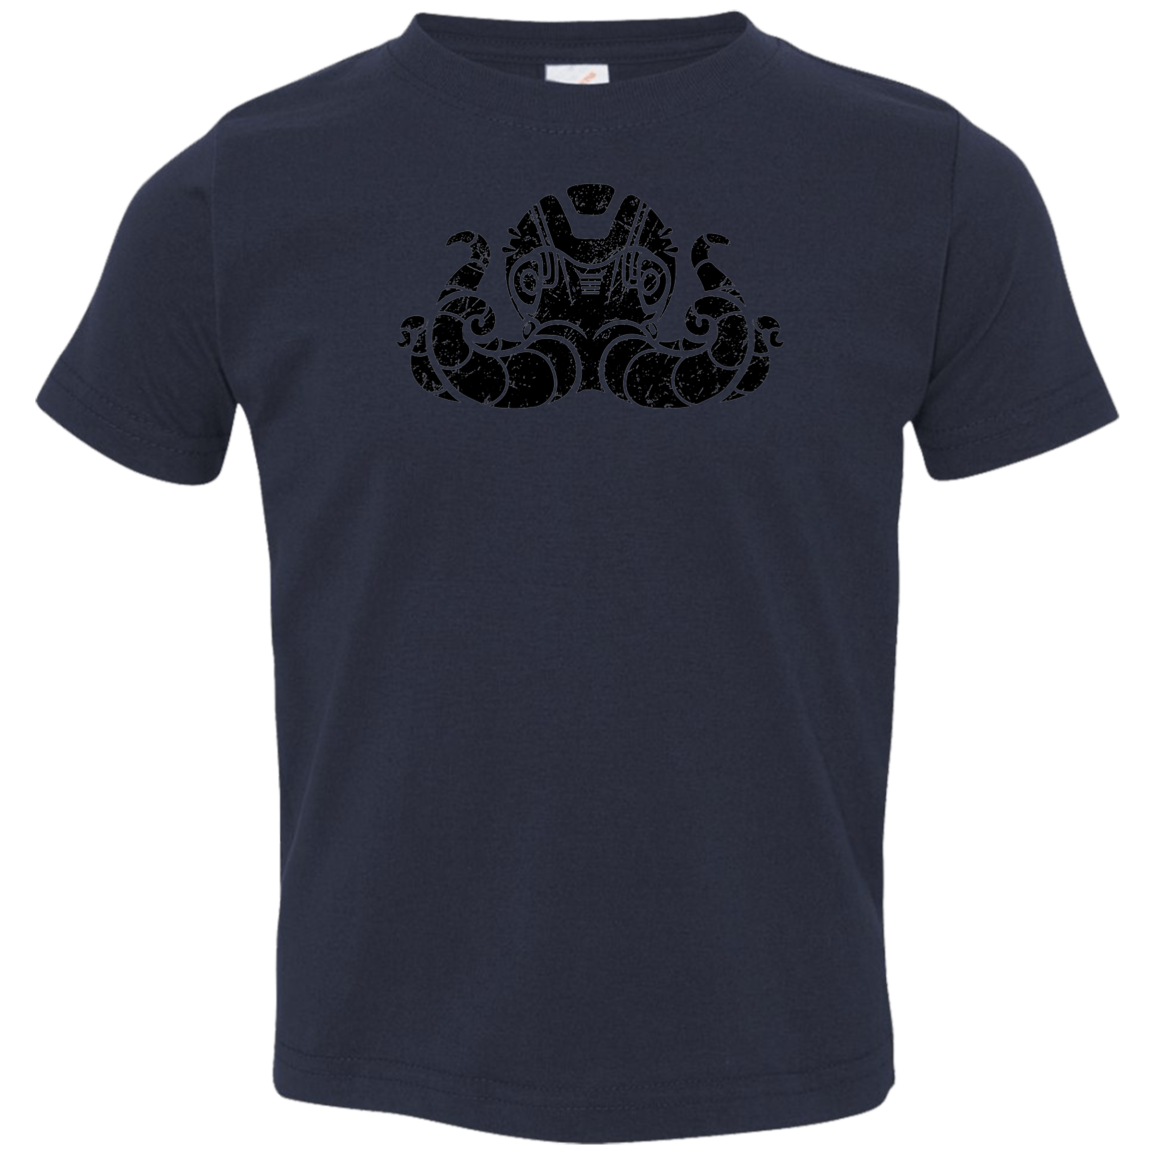 Black Distressed Emblem T-Shirt for Toddlers (Octopus/Matey)